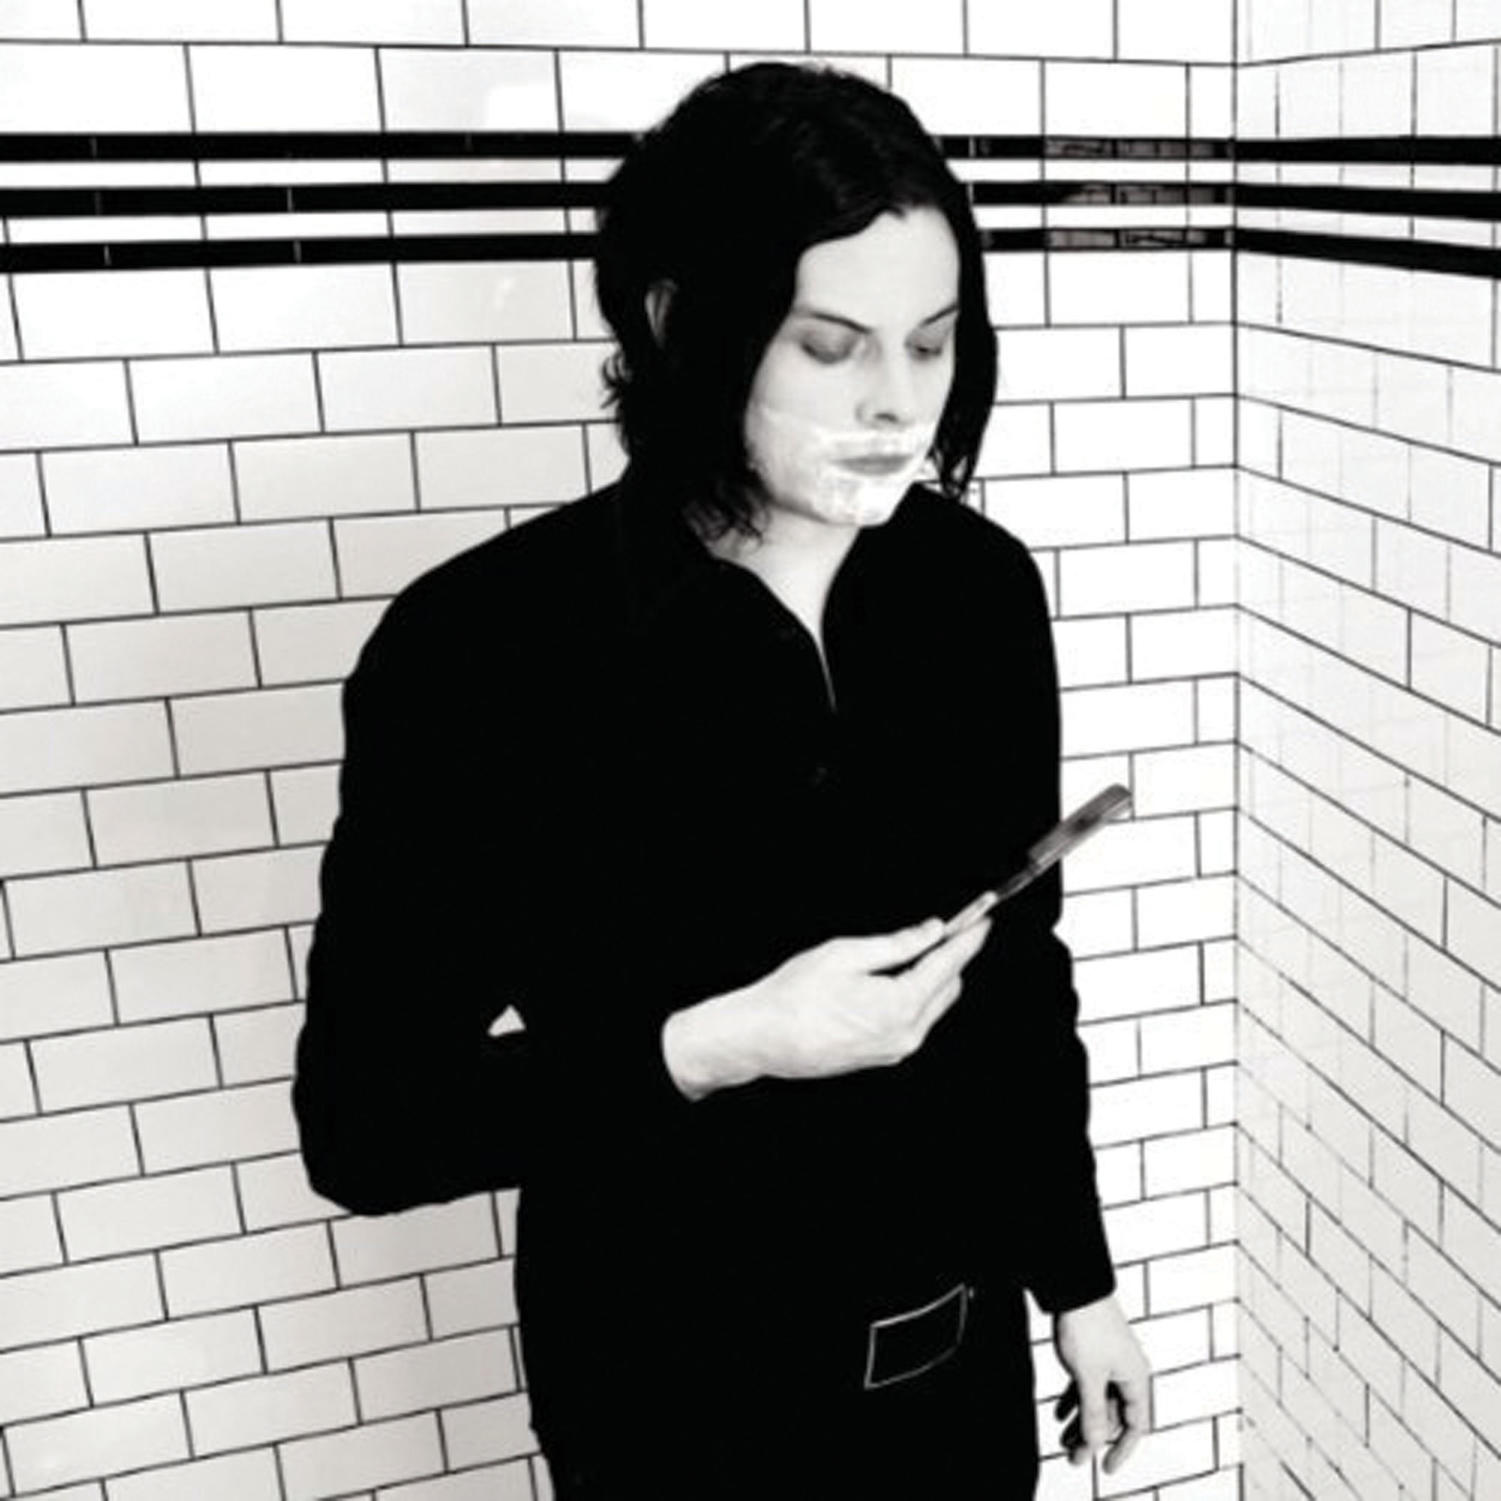 Jack White, former lead vocal for The White Stripes, will release his debut album Blunderbuss later this month.